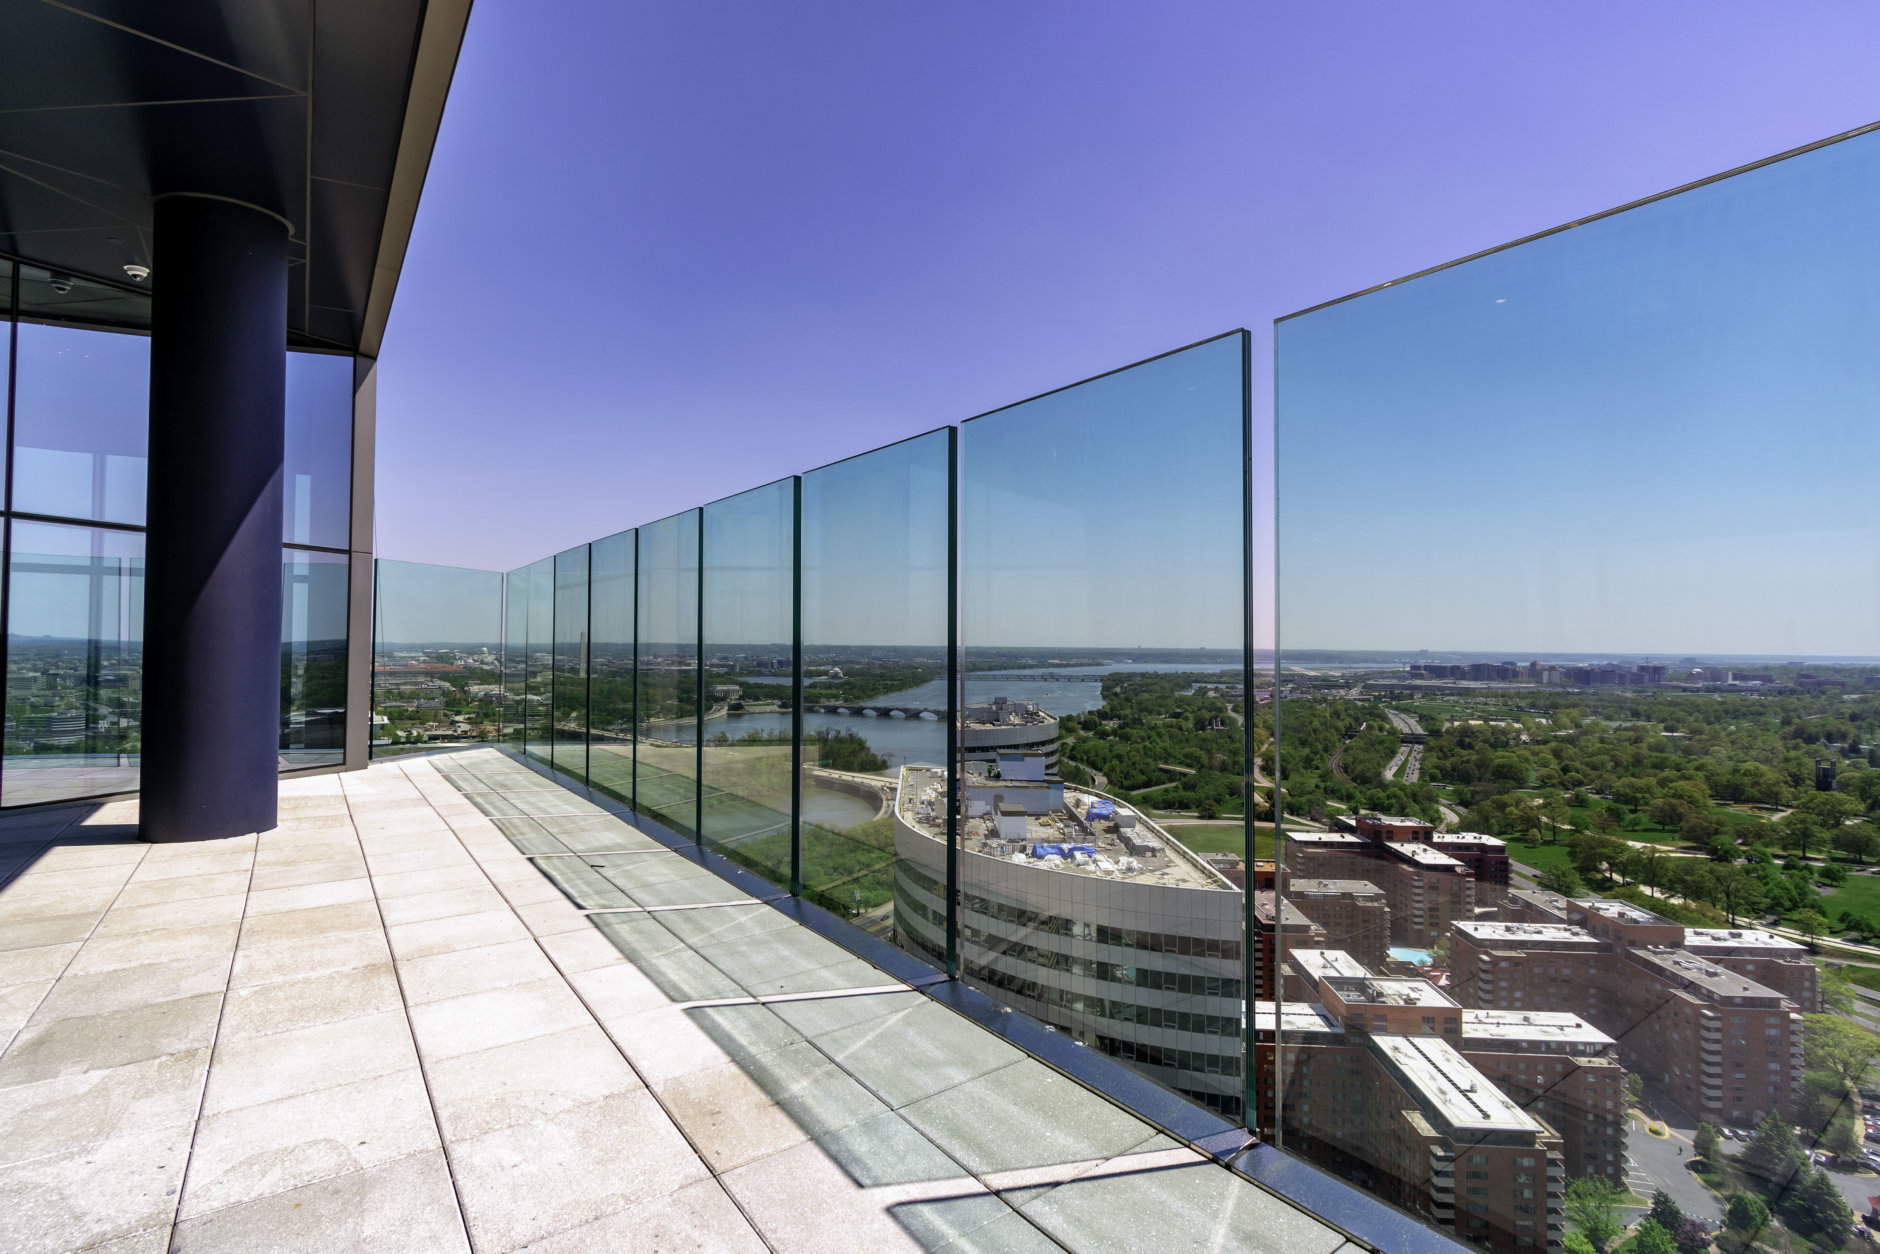 The observation deck at CEB Tower, named after its primary tenant, the Corporate Executive Board, is on the 31st floor of the tallest building inside the Beltway and has 360-degree views of D.C., Maryland and Virginia. (Courtesy JBG Smith)